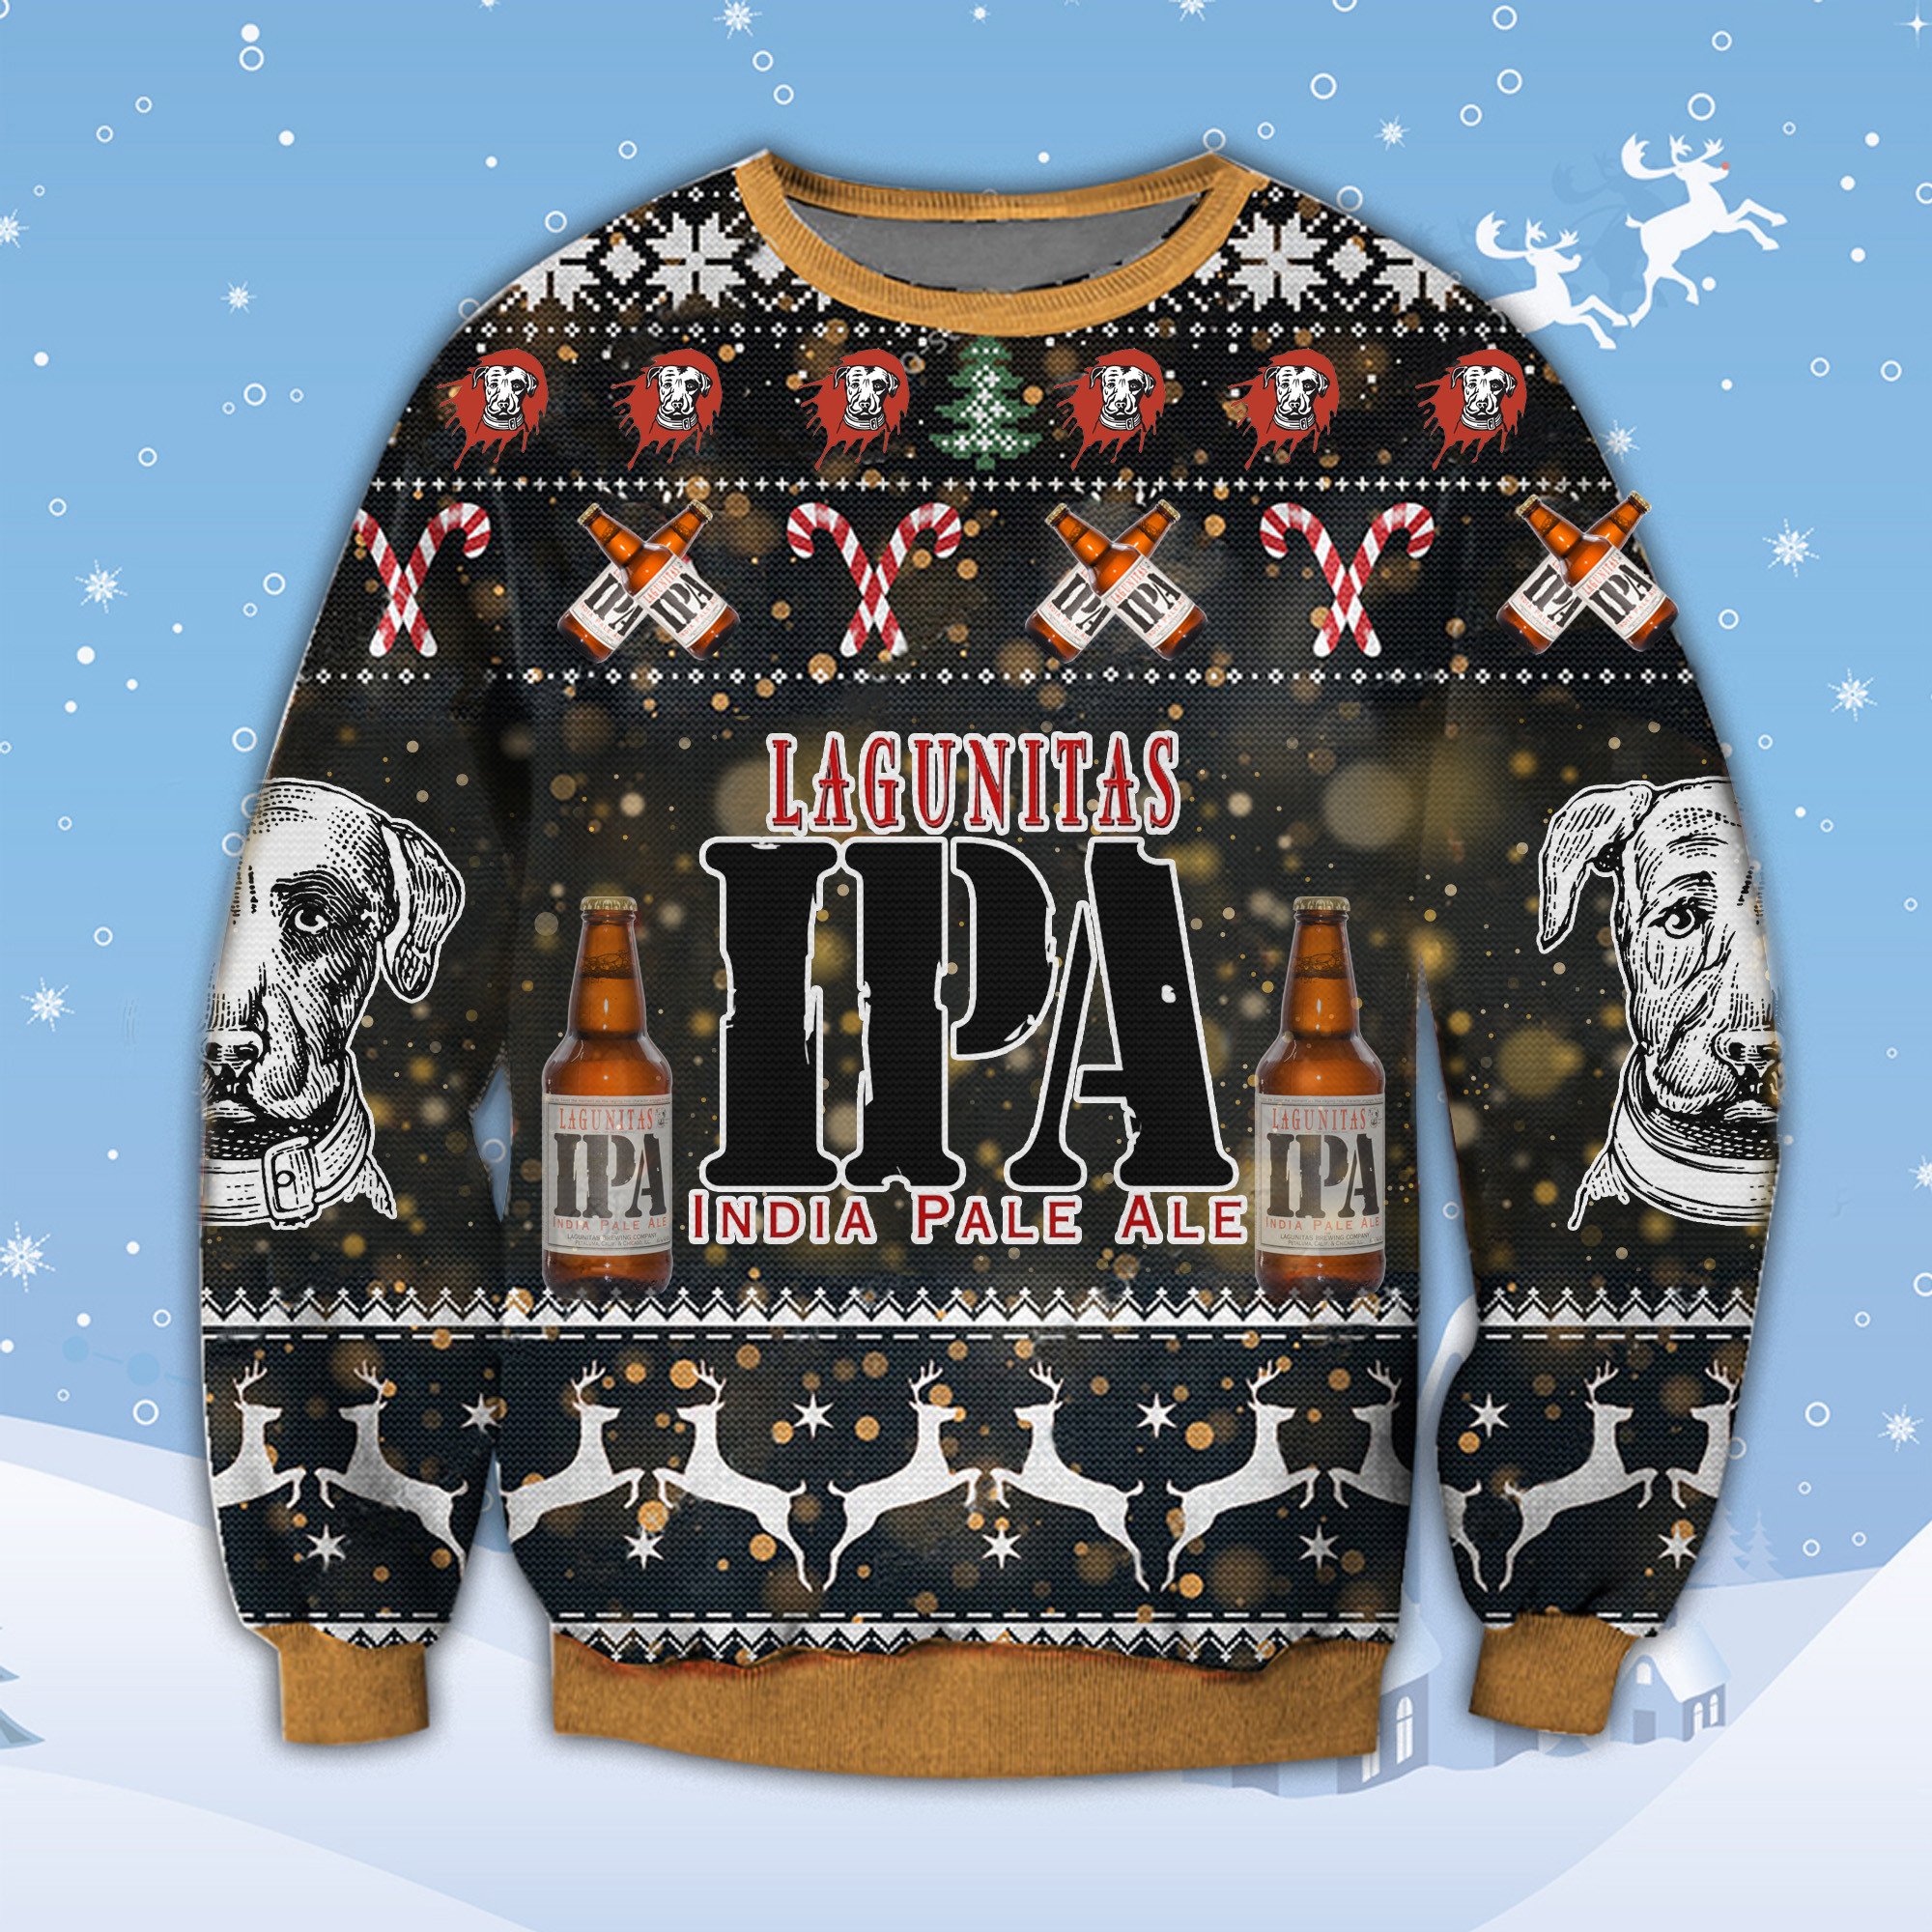 NEW Lagunitas India Pale Ale ugly Christmas sweater 9